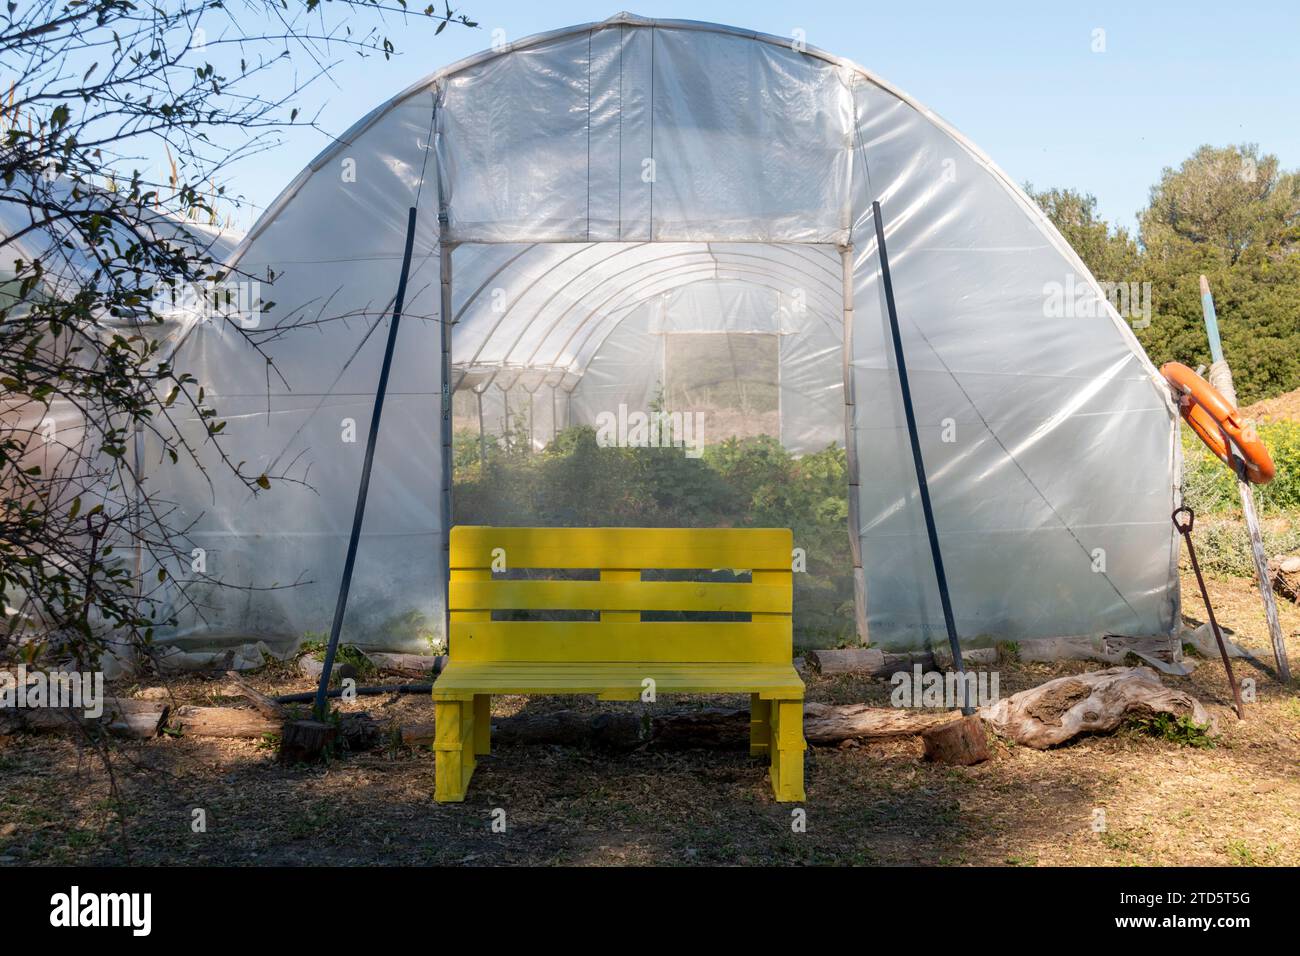 View of the entrance to a plastic greenhouse Stock Photo